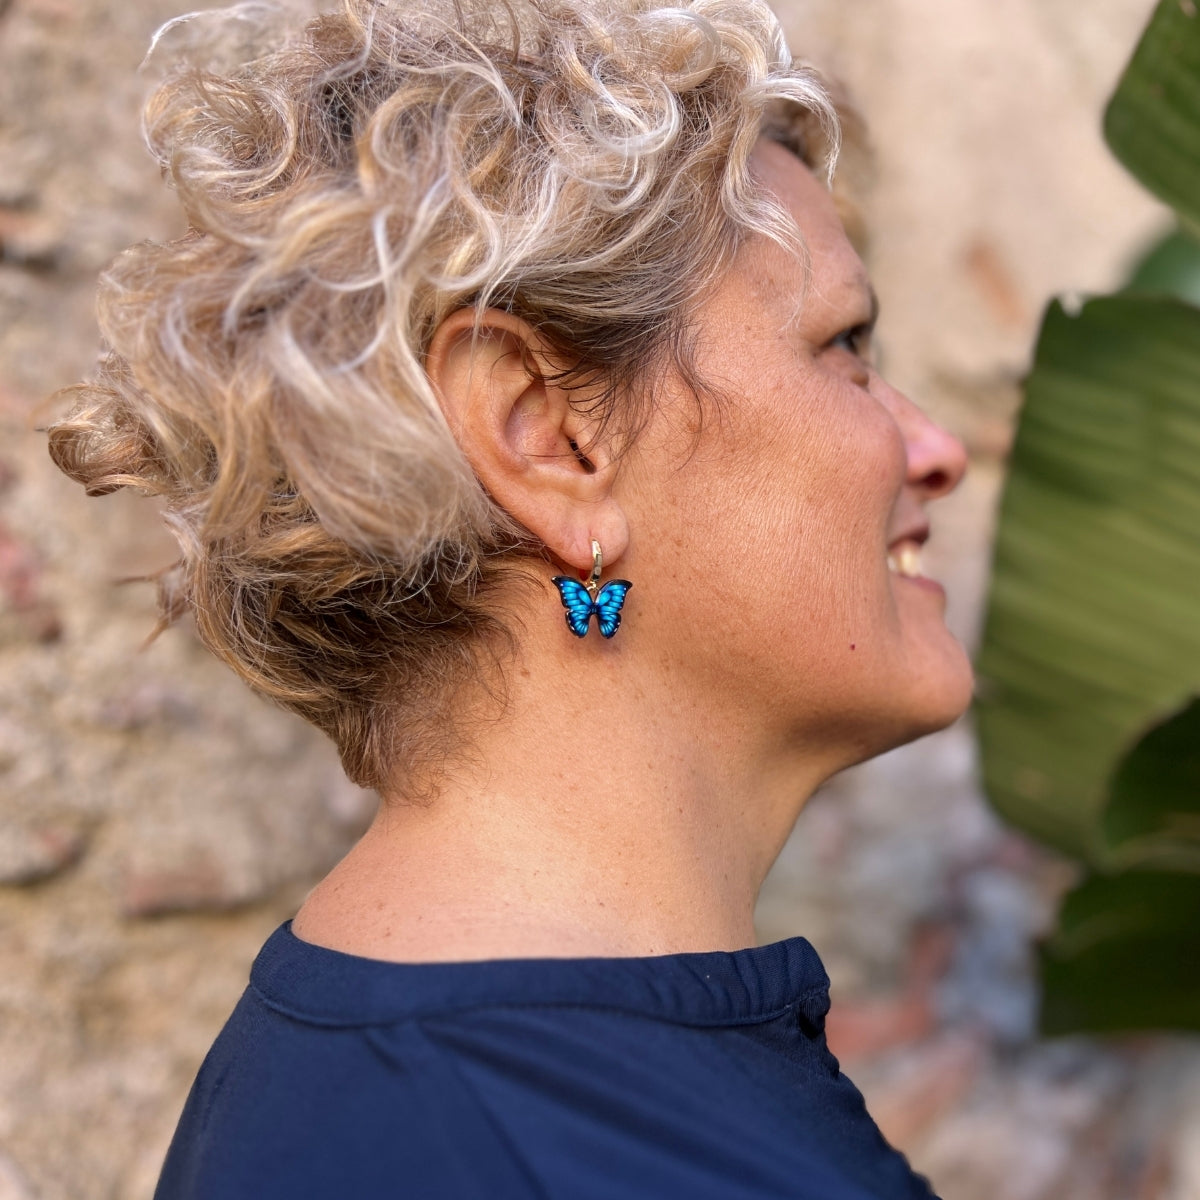 Let the "Joyful Butterfly Dance Earrings" be your mindful companions, encouraging you to dance through life with the carefree spirit of a butterfly.